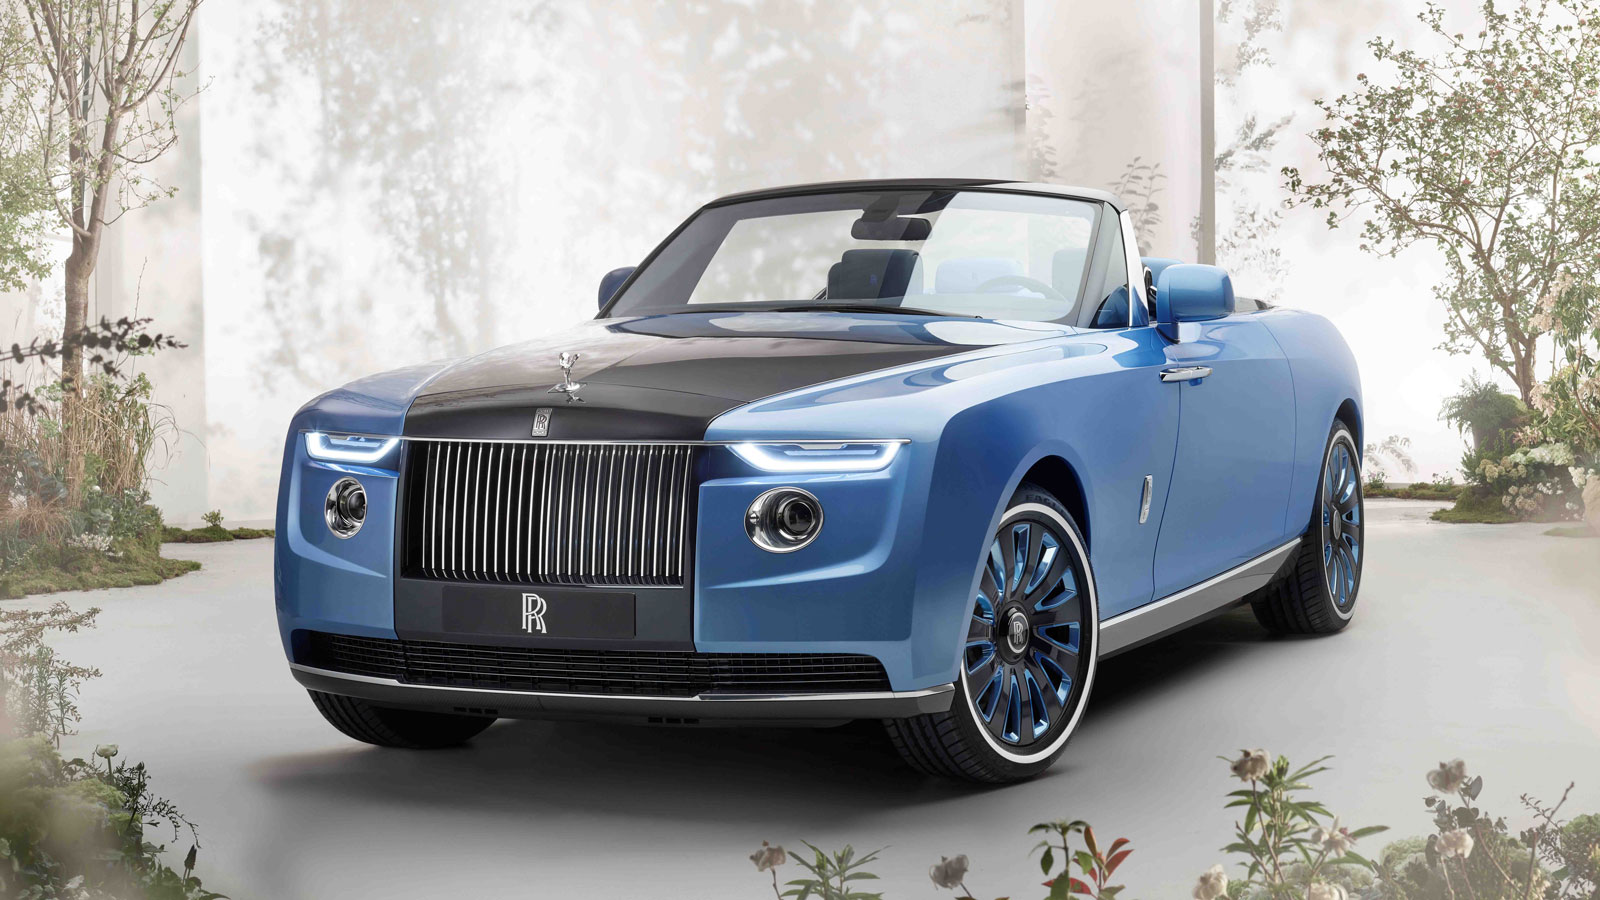 When Your First Impression Is “Wow,” The Rolls Royce ‘Nautical’ Dawn